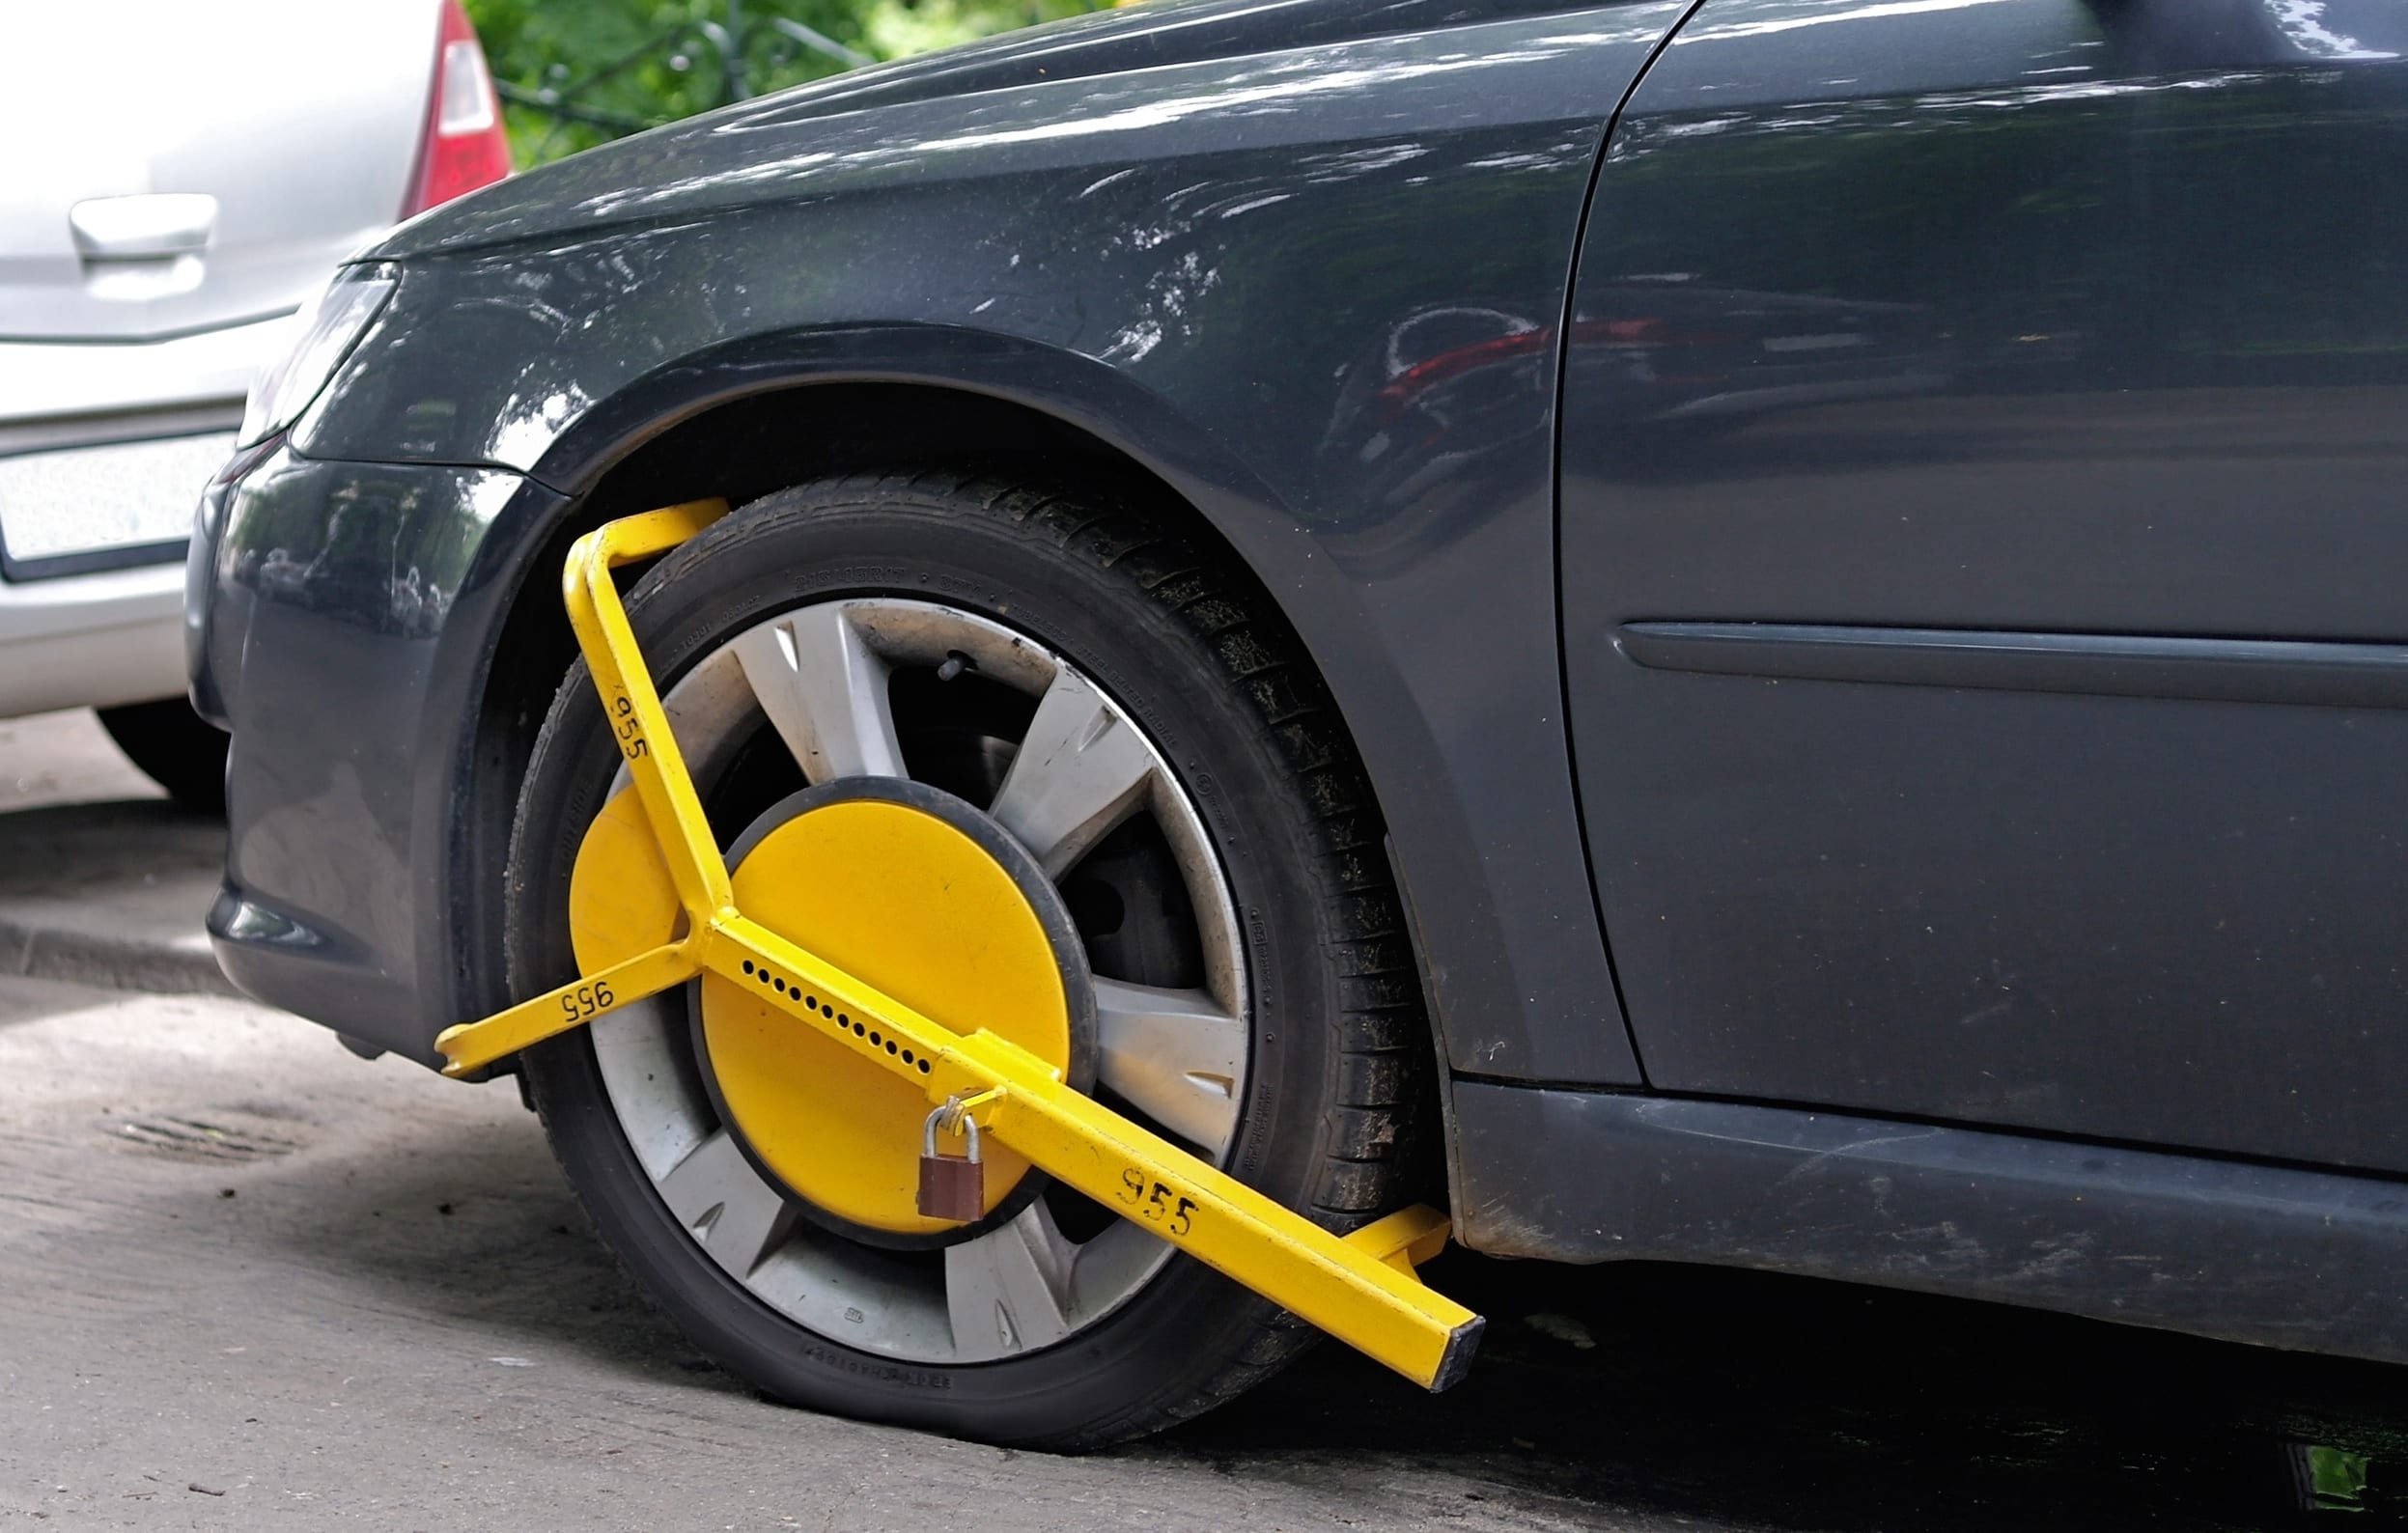 Wheel clamp mounted on parked car